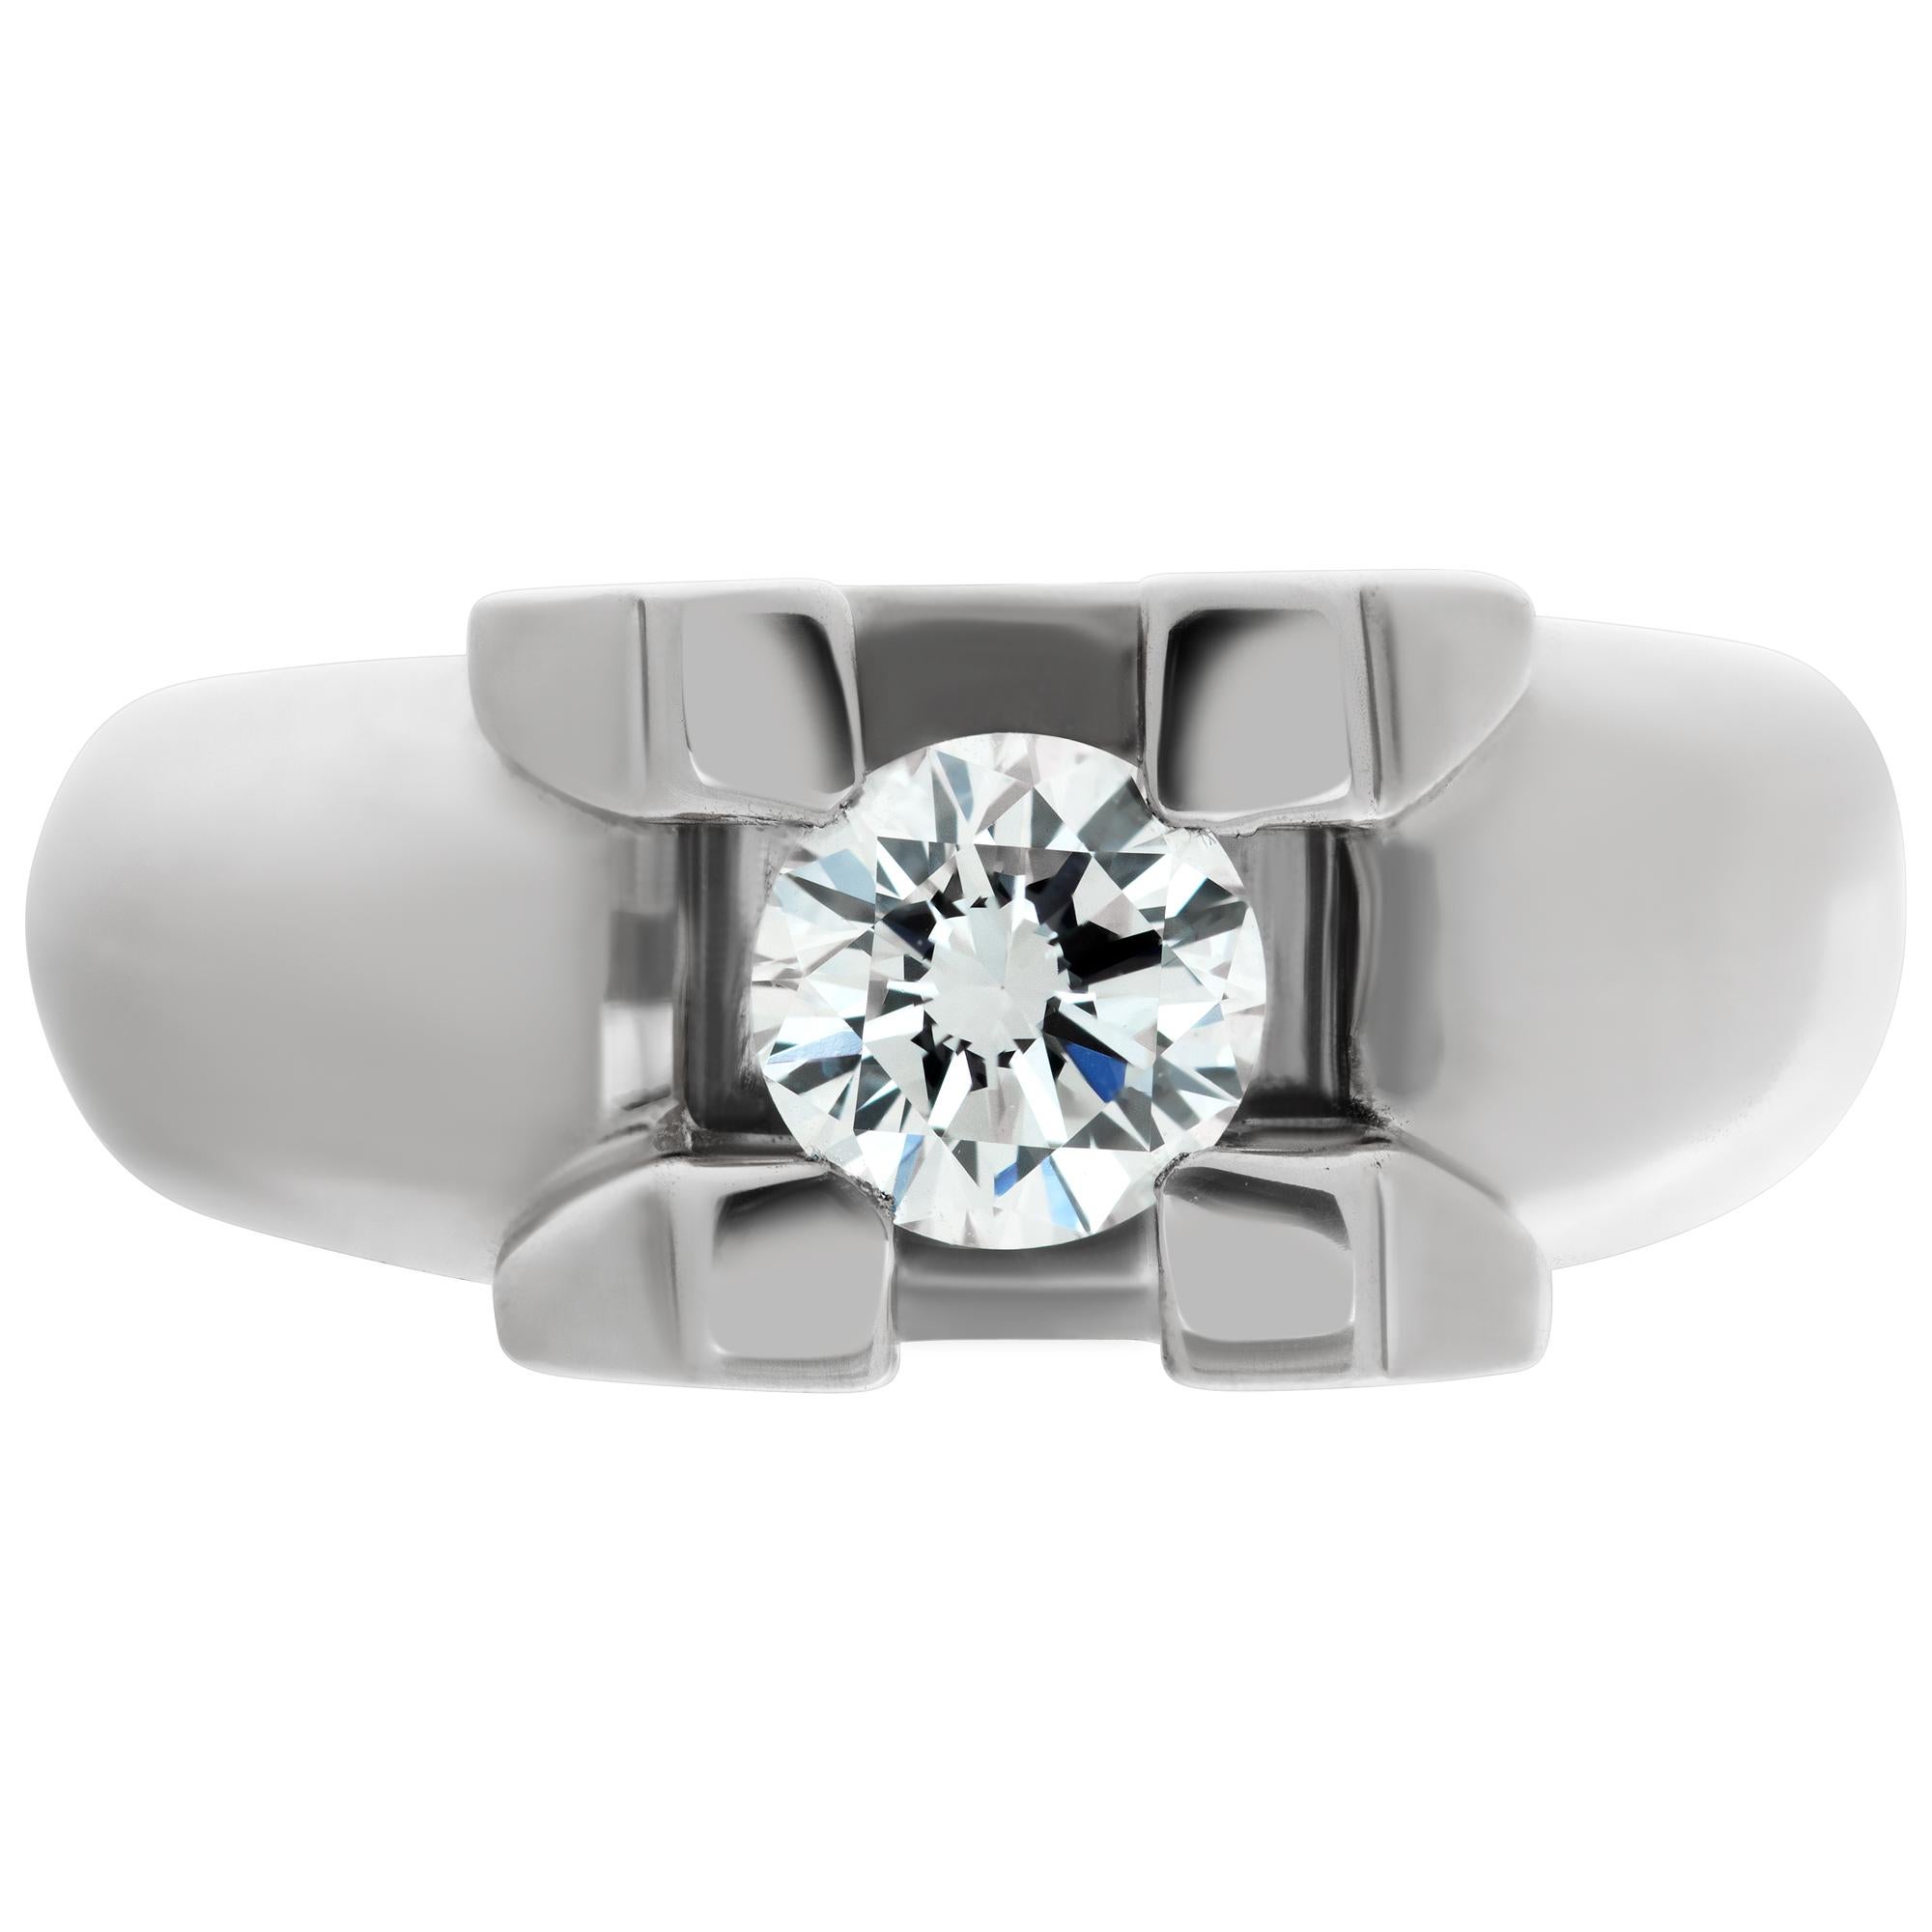 Beautiful 18k white gold with round diamond with approx 0.75 carats, estimate H color VS2 clarity. Width at head: 9.4mm, width at shank: 3.8mm. Size: 8.0.This Diamond ring is currently size 8 and some items can be sized up or down, please ask! It